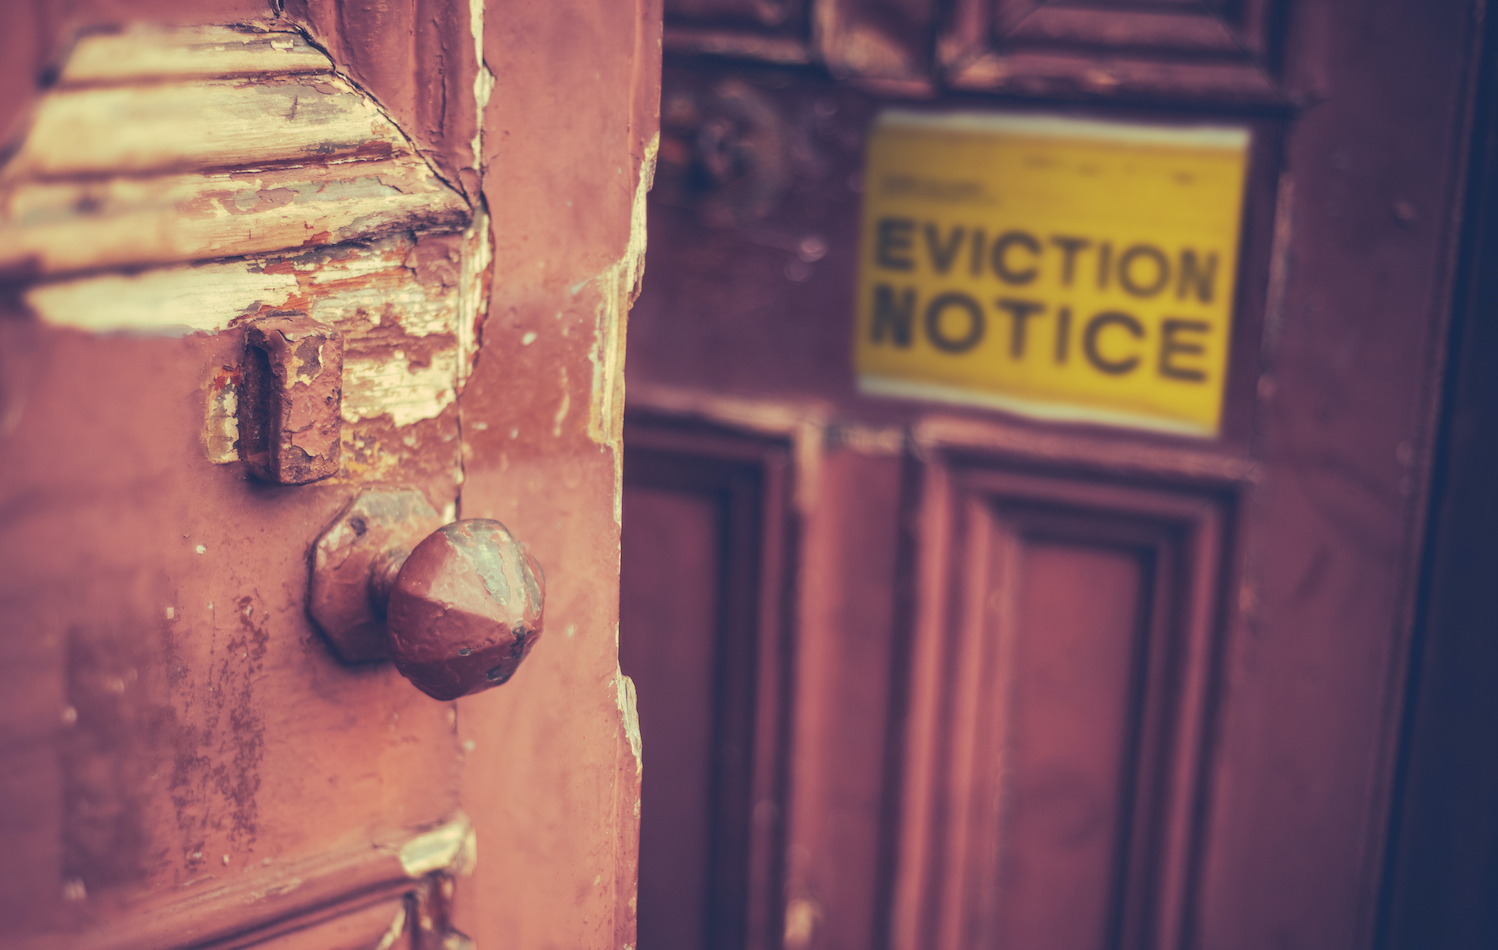 A close-up of an old chipping door. Blurred in the background is a sign that reads "EVICTION NOTICE" in all capital letters.